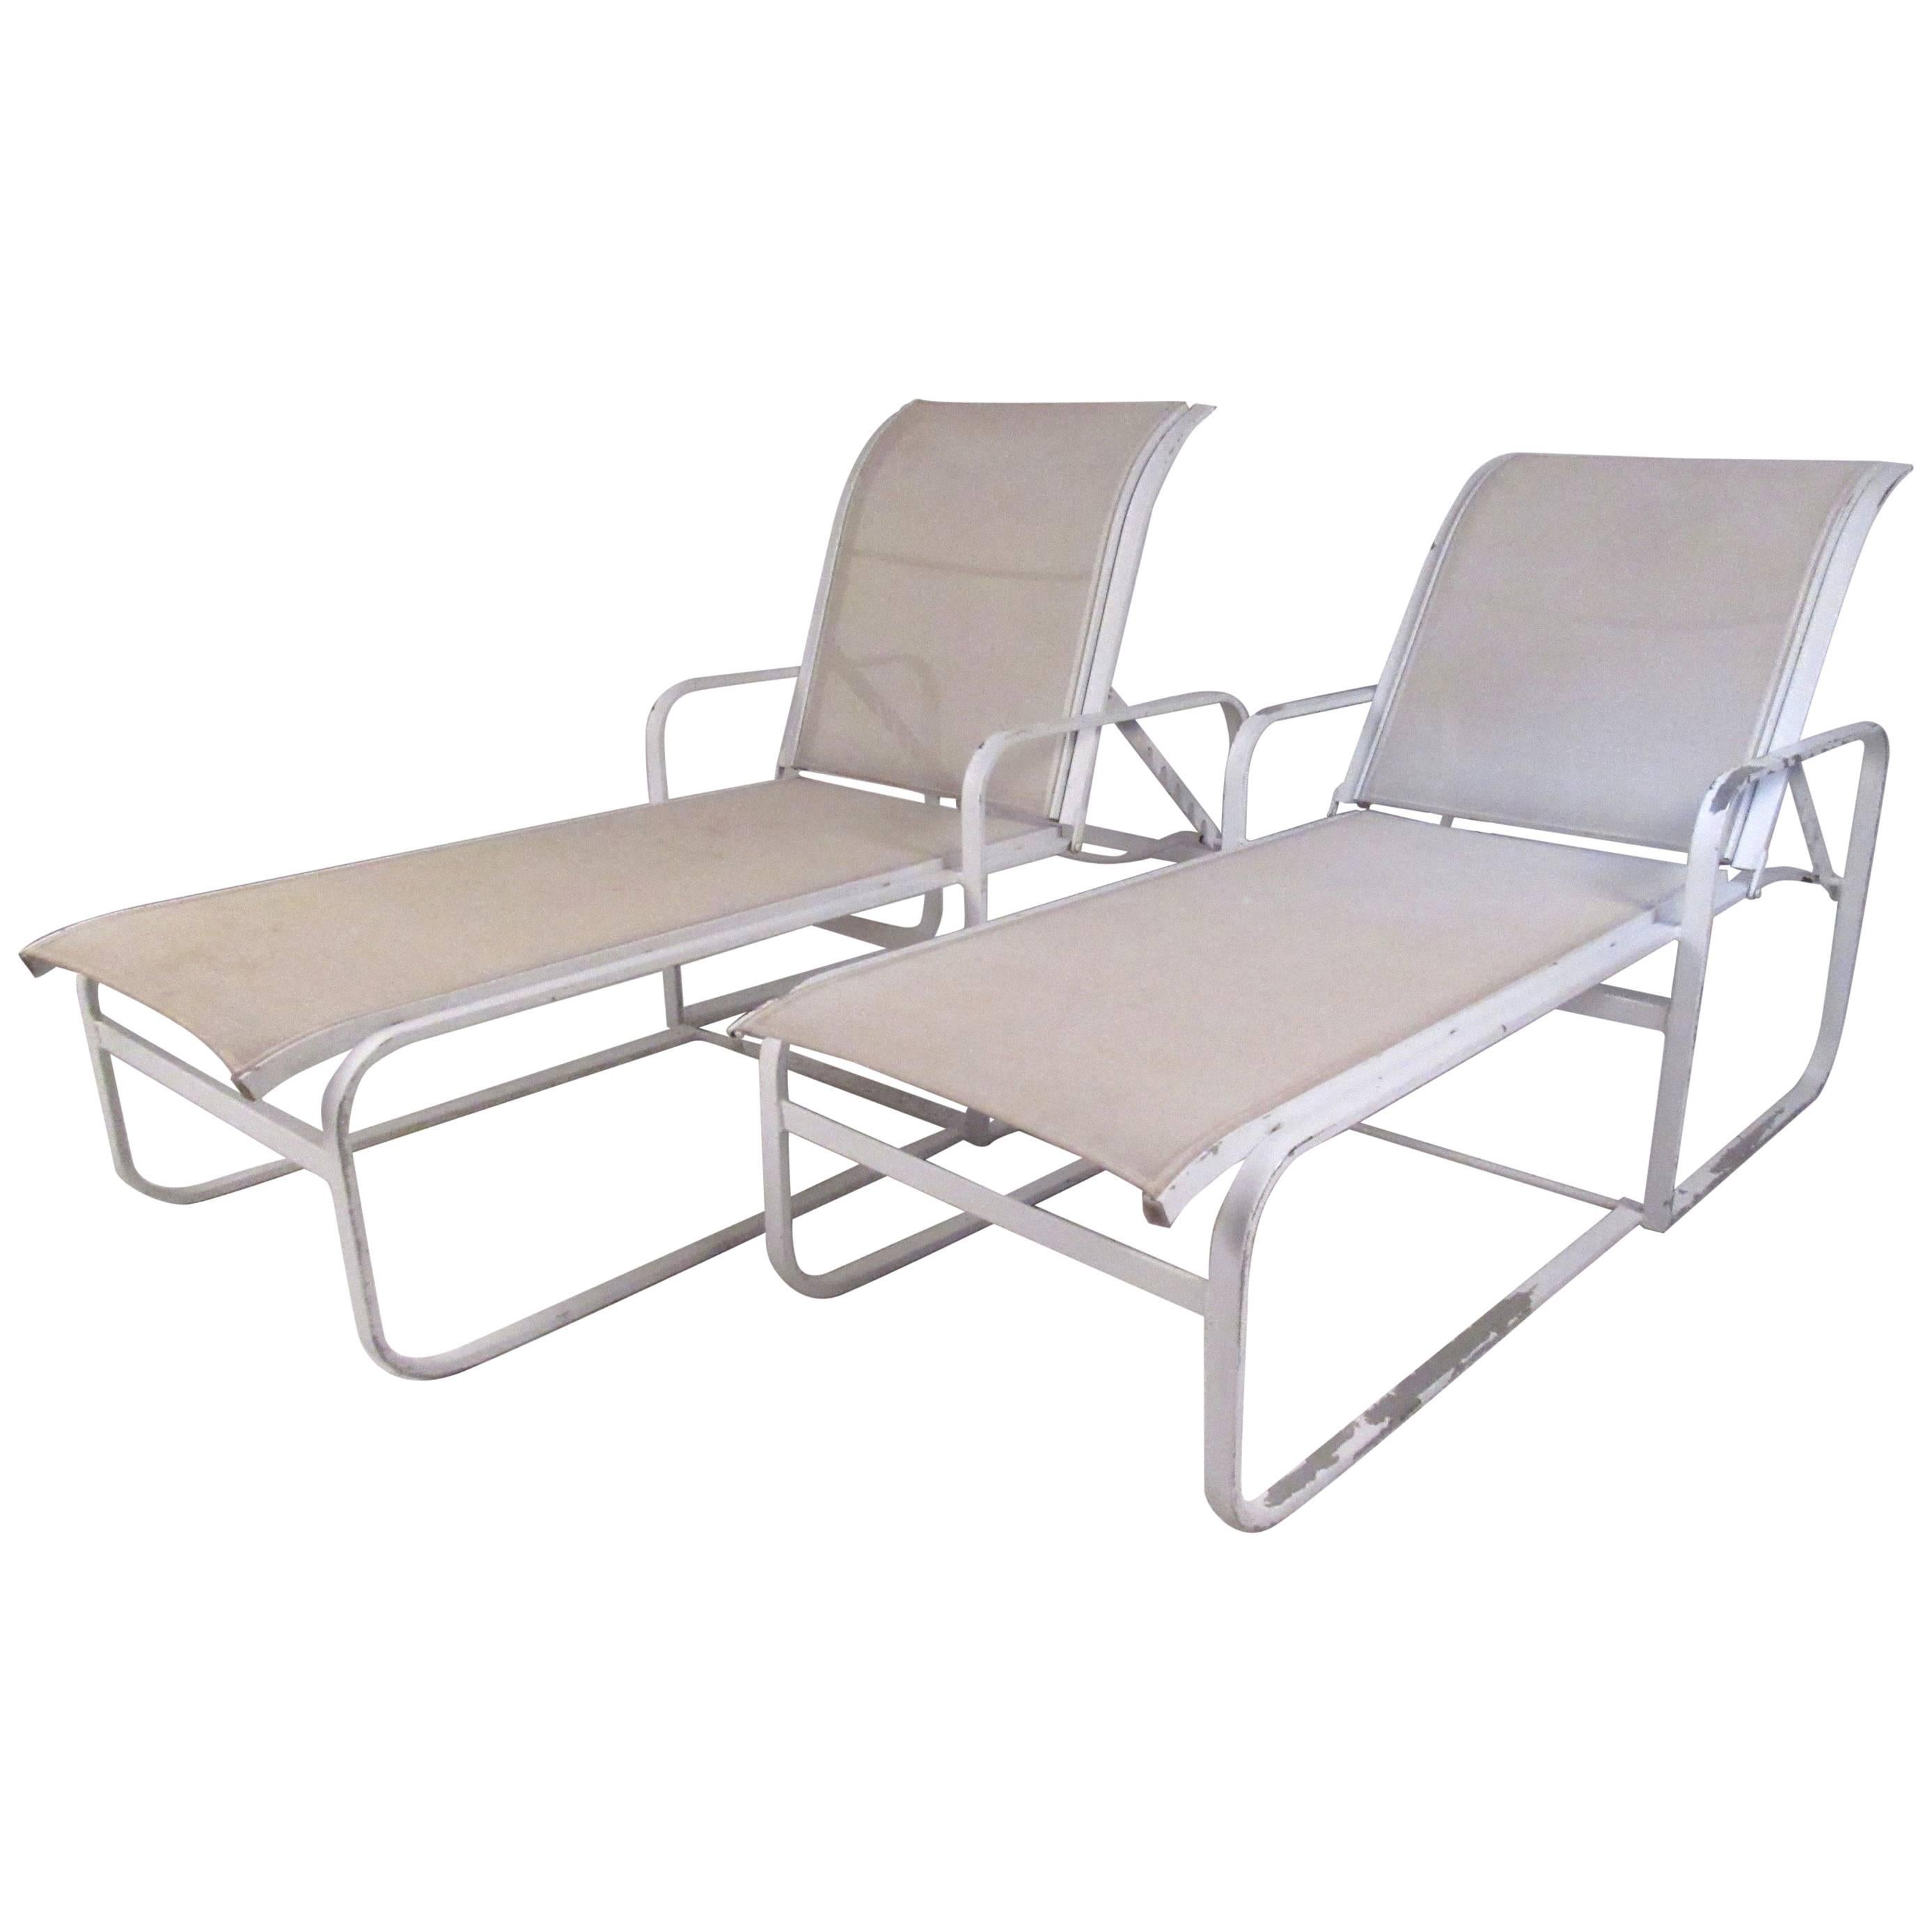 Pair of Woodard Patio Recliner Chaise Lounge Chairs